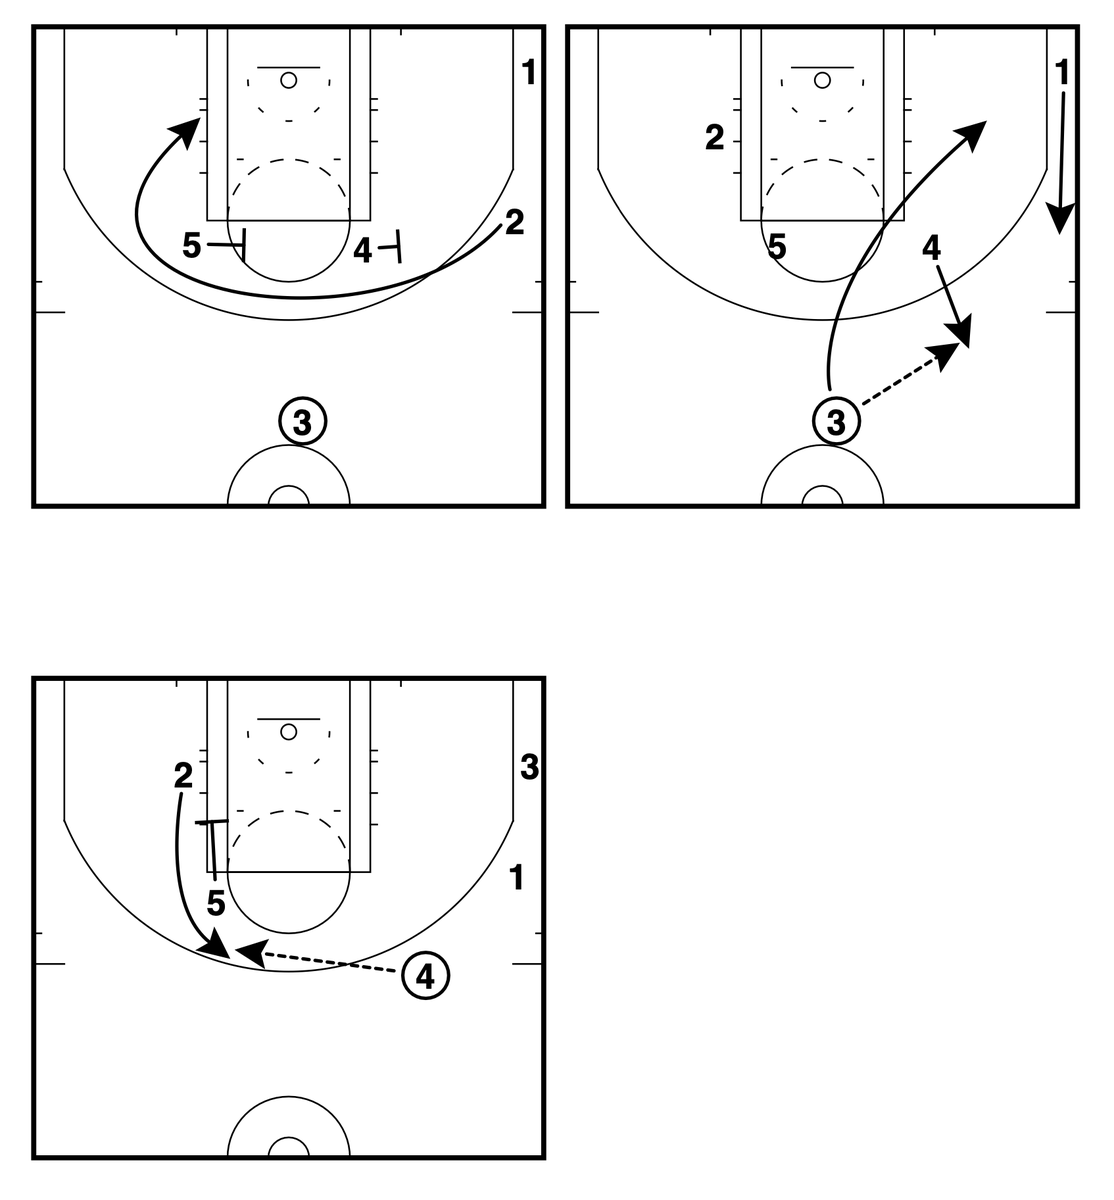 ⛵️Los Angeles Clippers⛵️ –  Loop Pindown

🔑Clear out the side to get empty pindown screen action that leads to…

✔️Shot for 2
✔️Curl & attack for 2
✔️Layup on roll by 5
✔️The 5 slipping for a layup

@NBA | #NBAPlayoffs | #XsOs | #ClipperNation